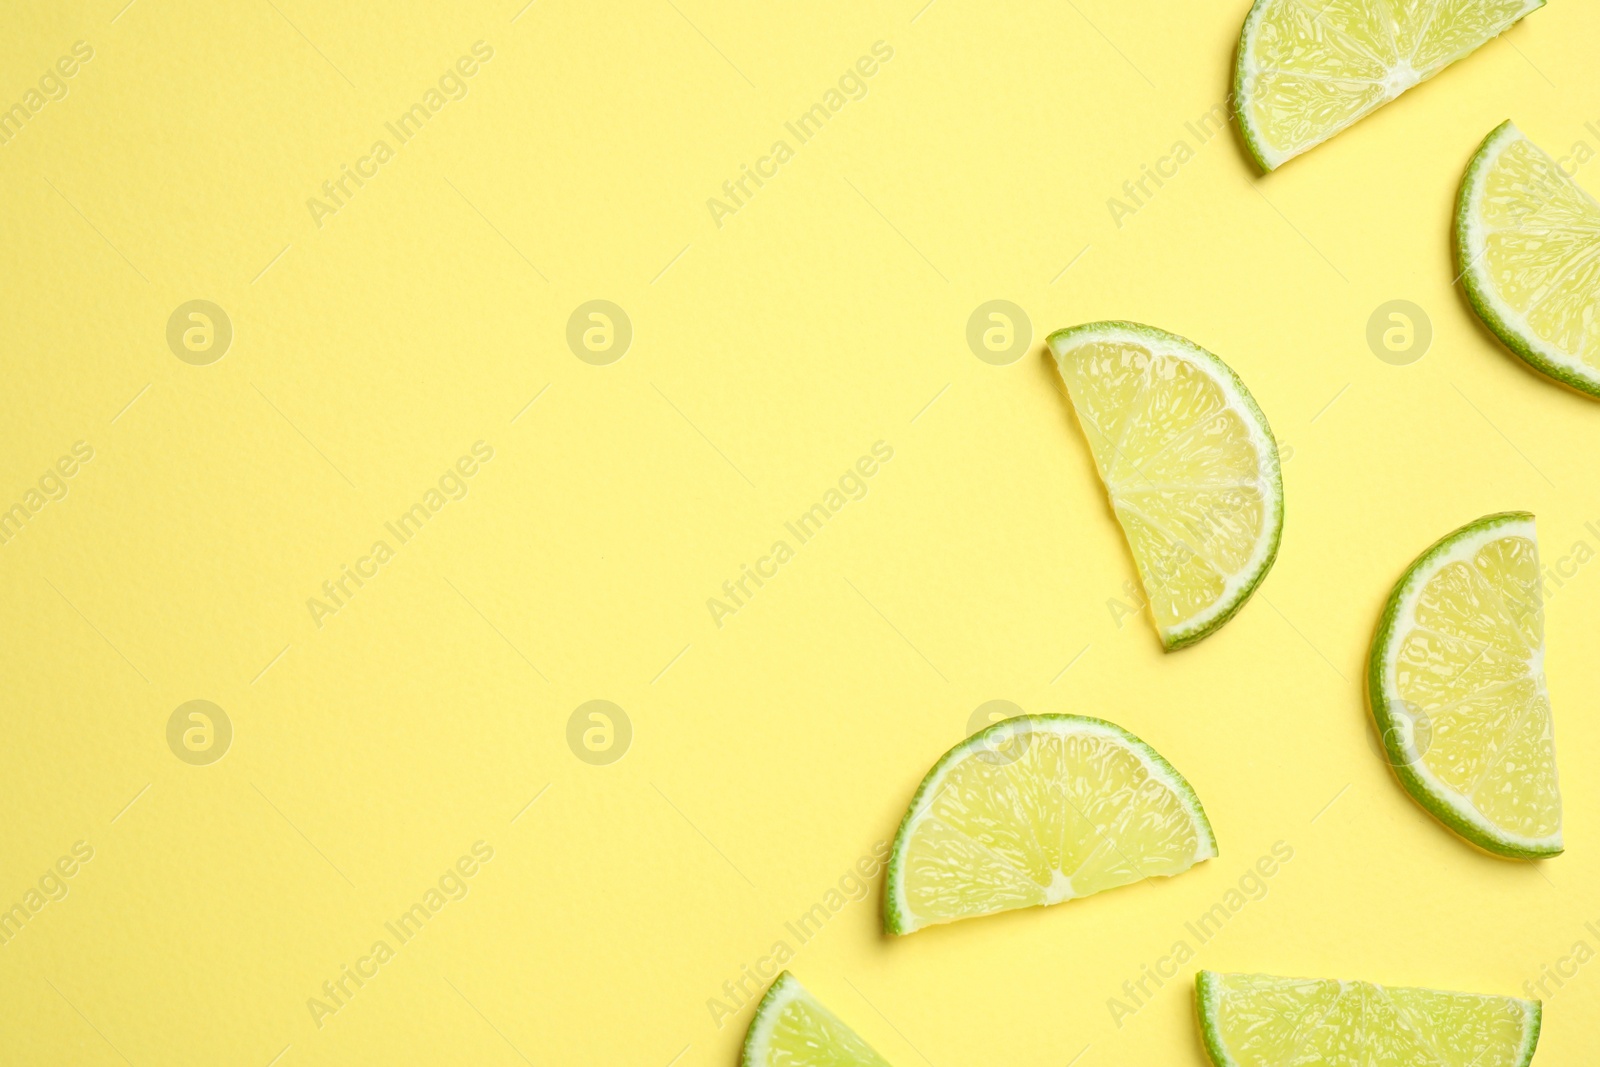 Photo of Juicy fresh lime slices on yellow background, flat lay. Space for text